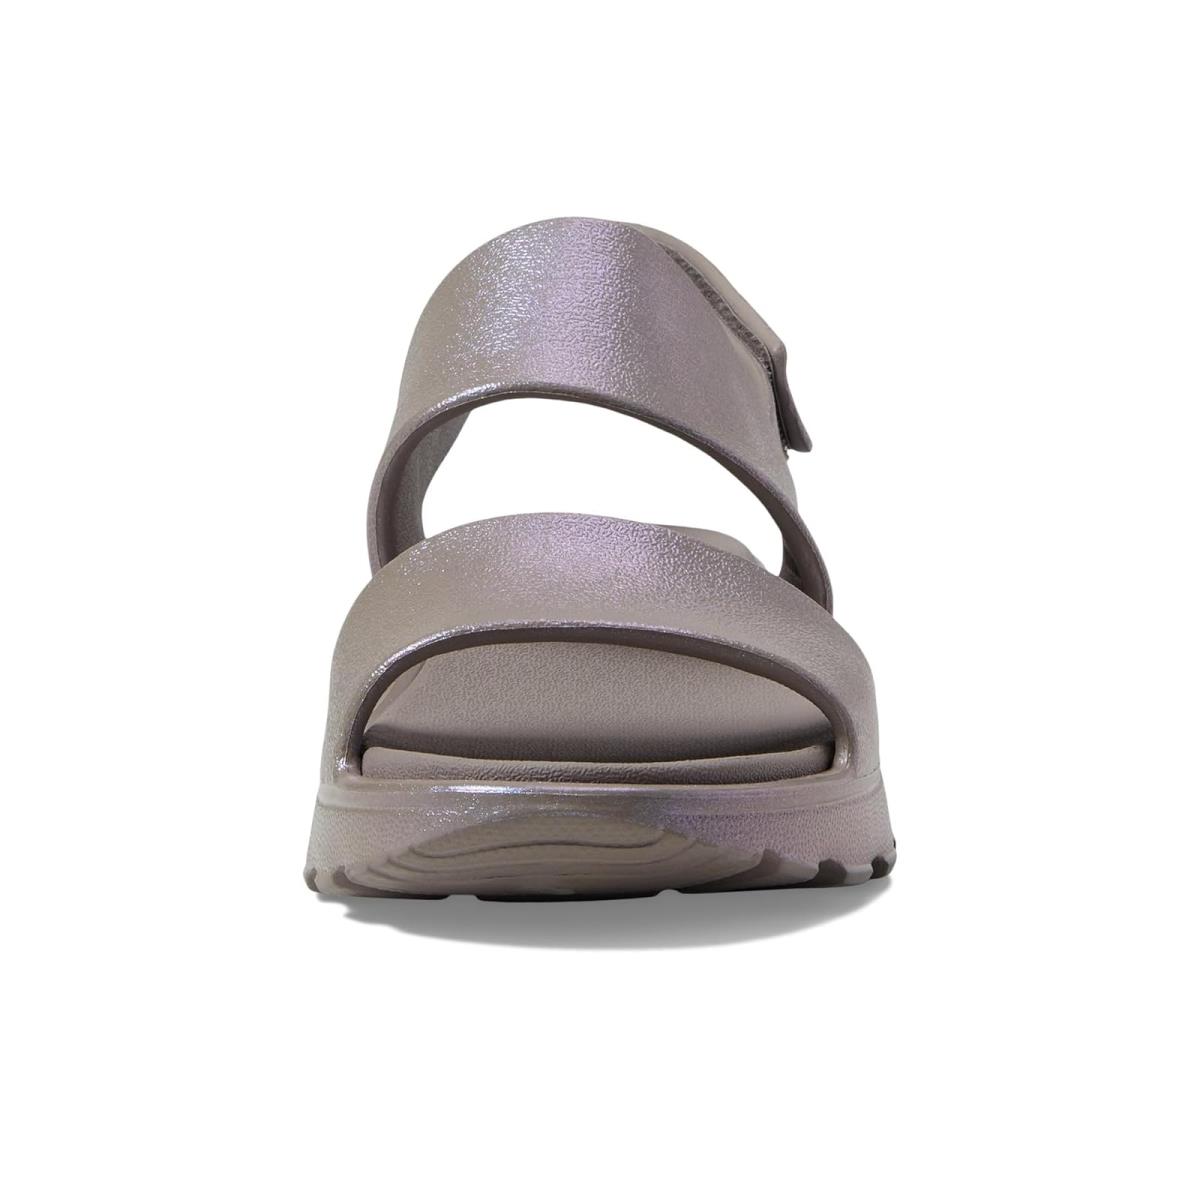 Woman`s Sandals Skechers Foamies Arch Fit Footsteps Iridescent Dark Taupe